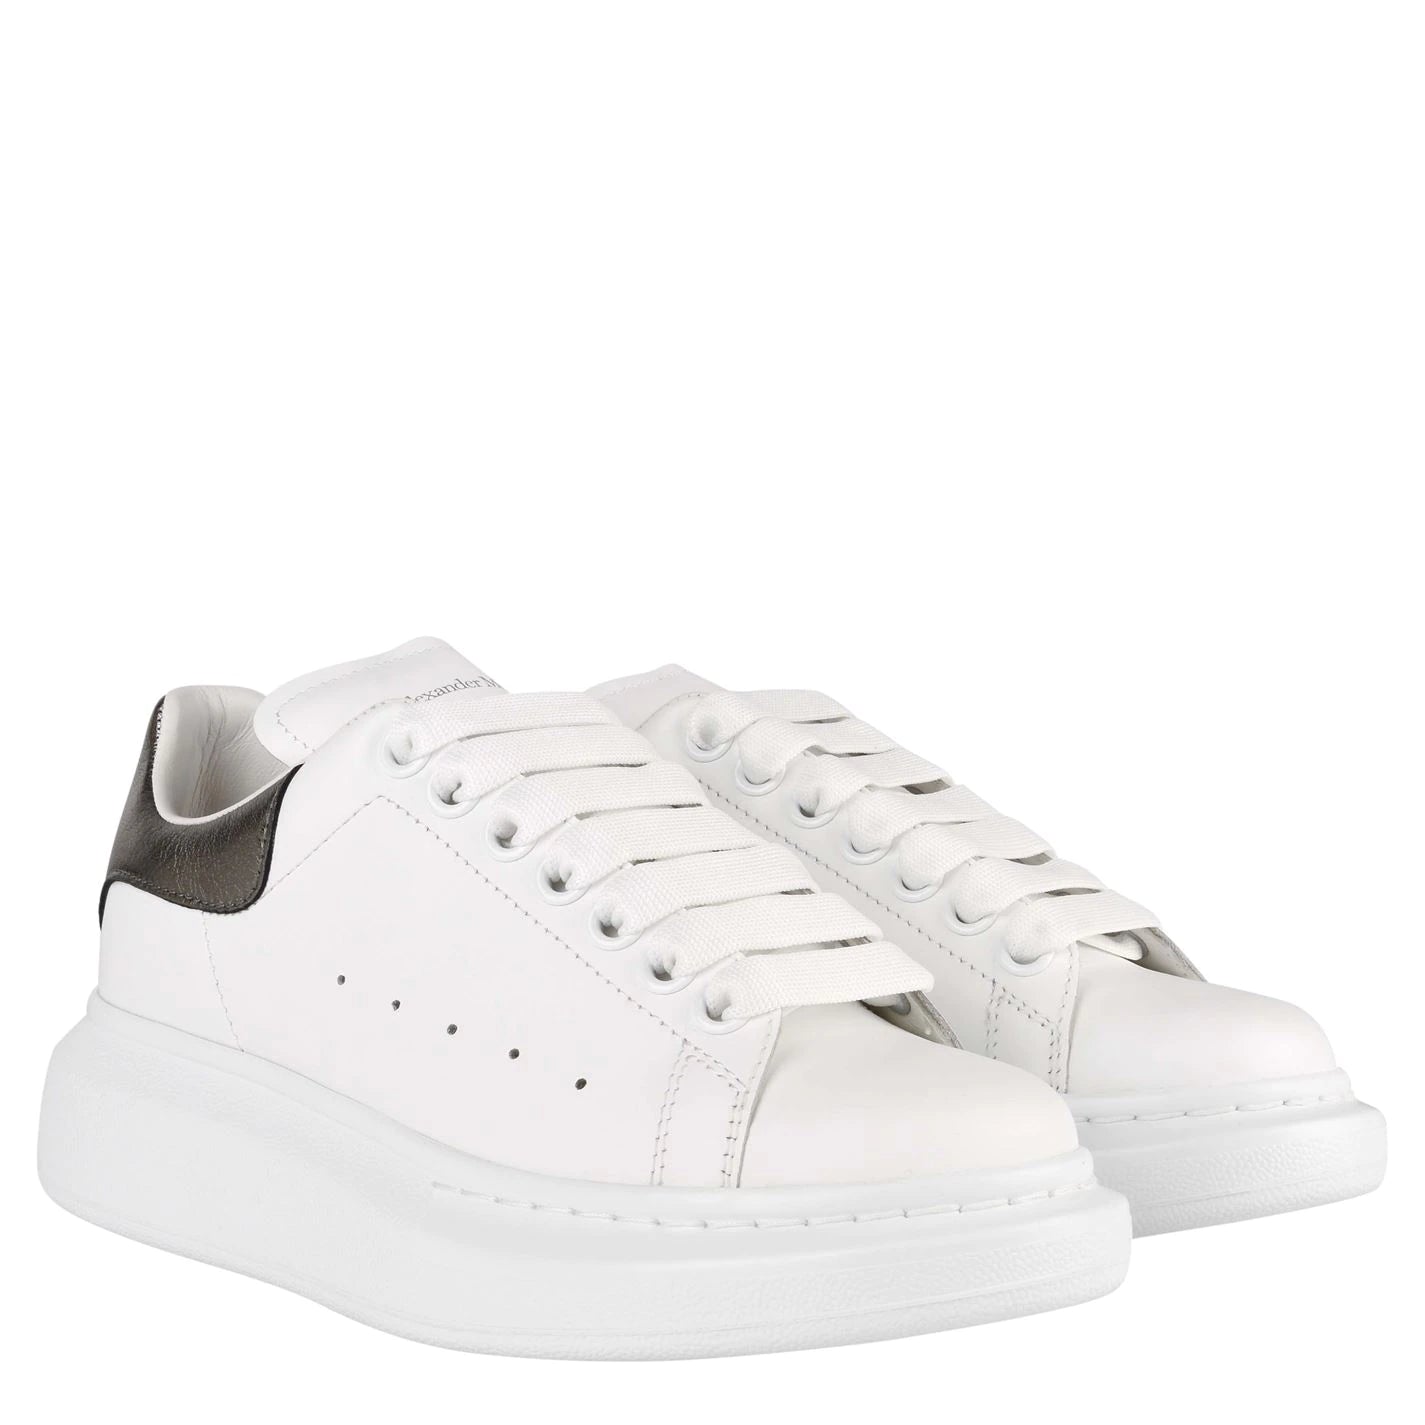 Double Boxed  419.99 Alexander McQueen Oversized White Pearl Women's Double Boxed